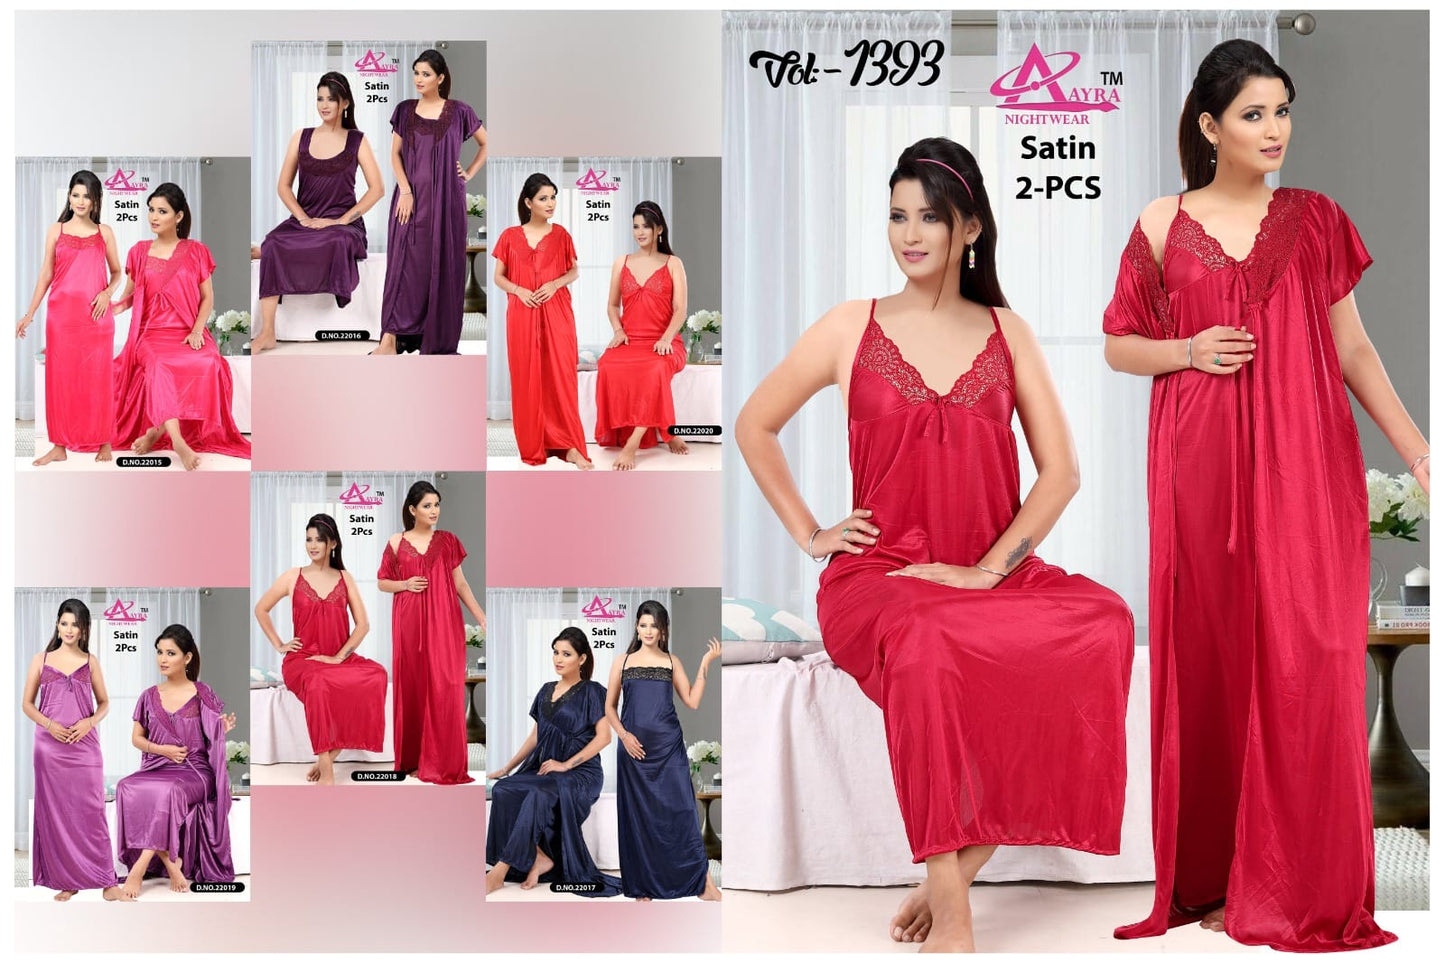 1395-1393 Aayra Satin Night Gowns